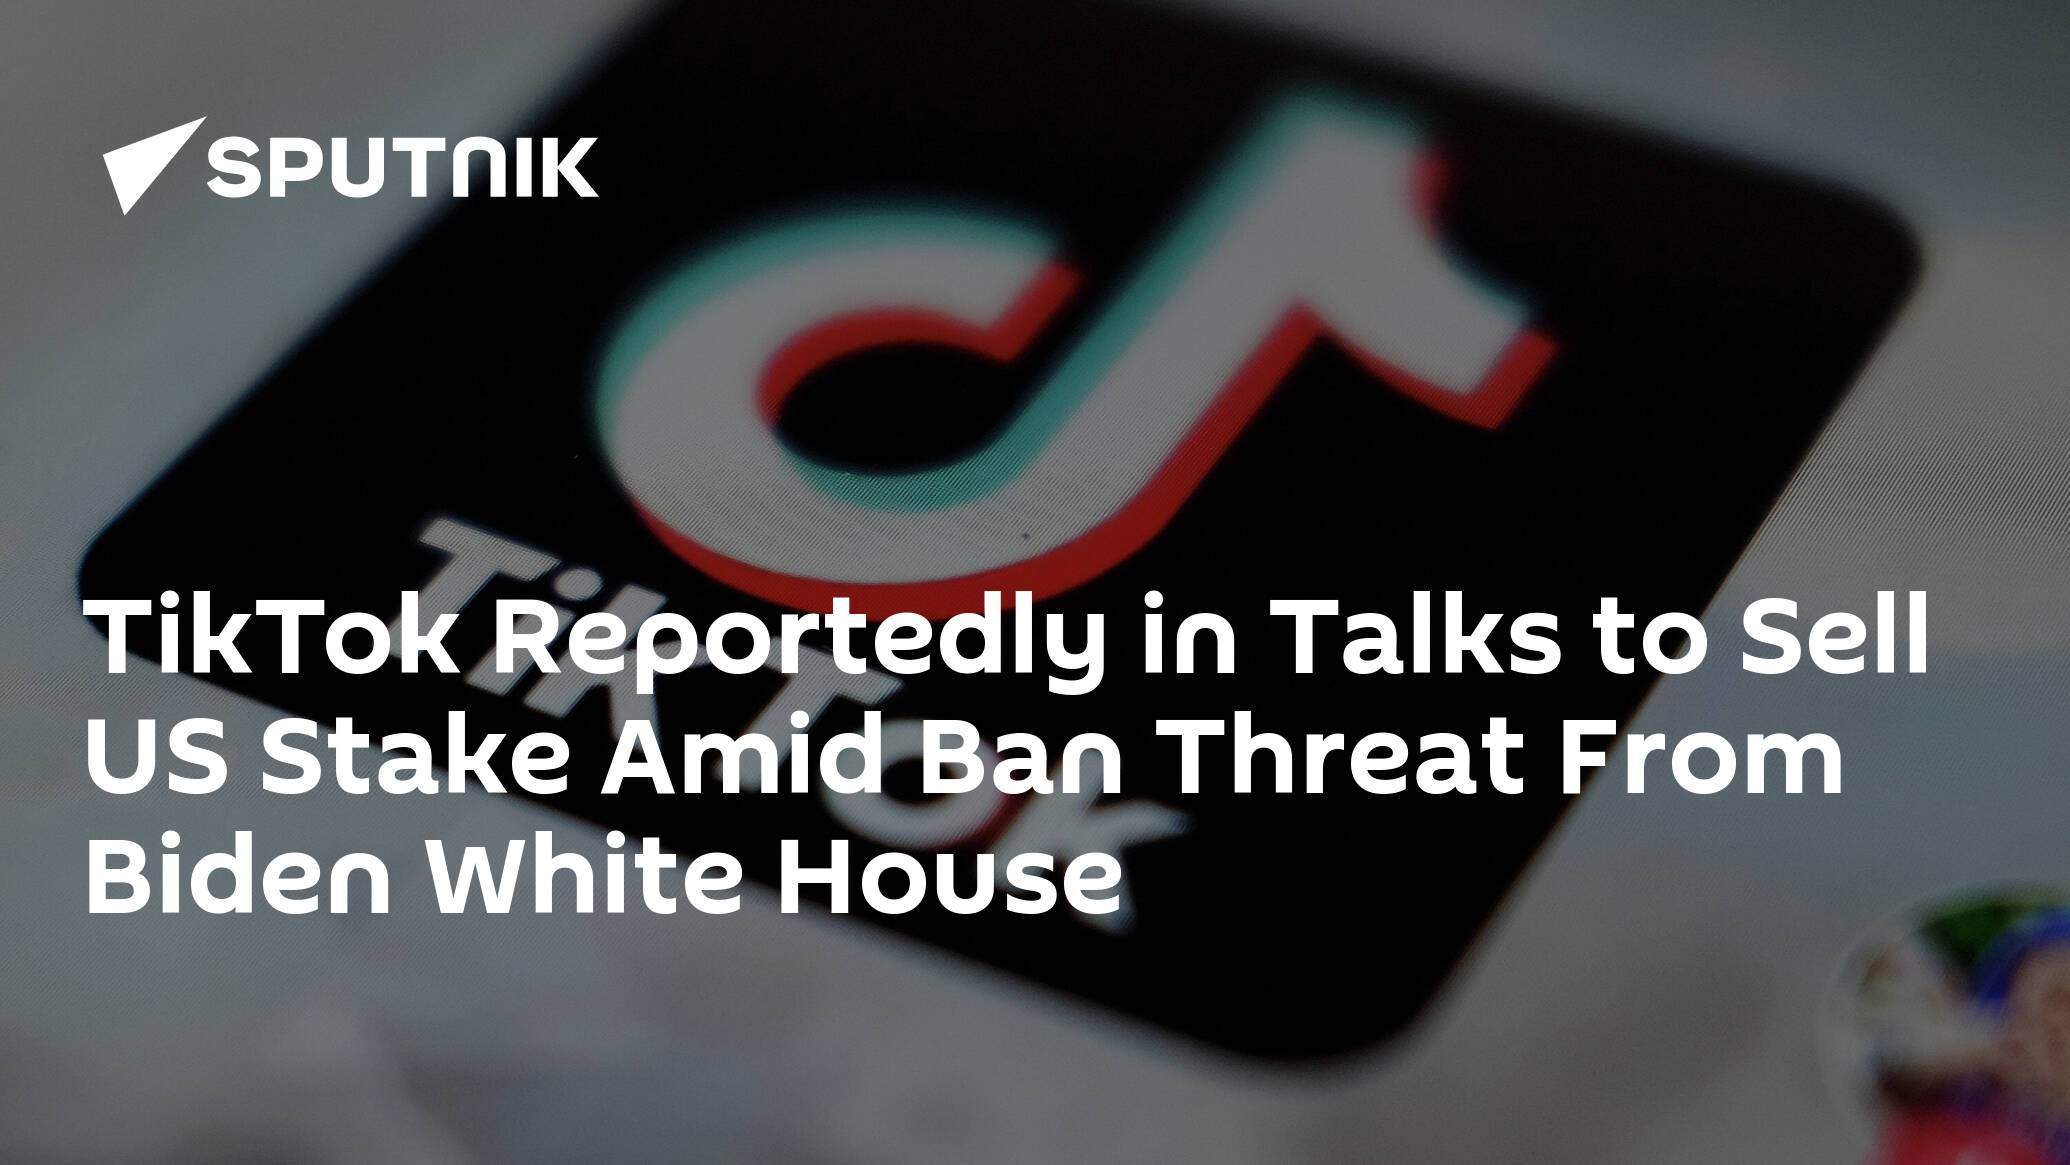 tiktok-reportedly-in-talks-to-sell-us-stake-amid-ban-threat-from-biden-white-house